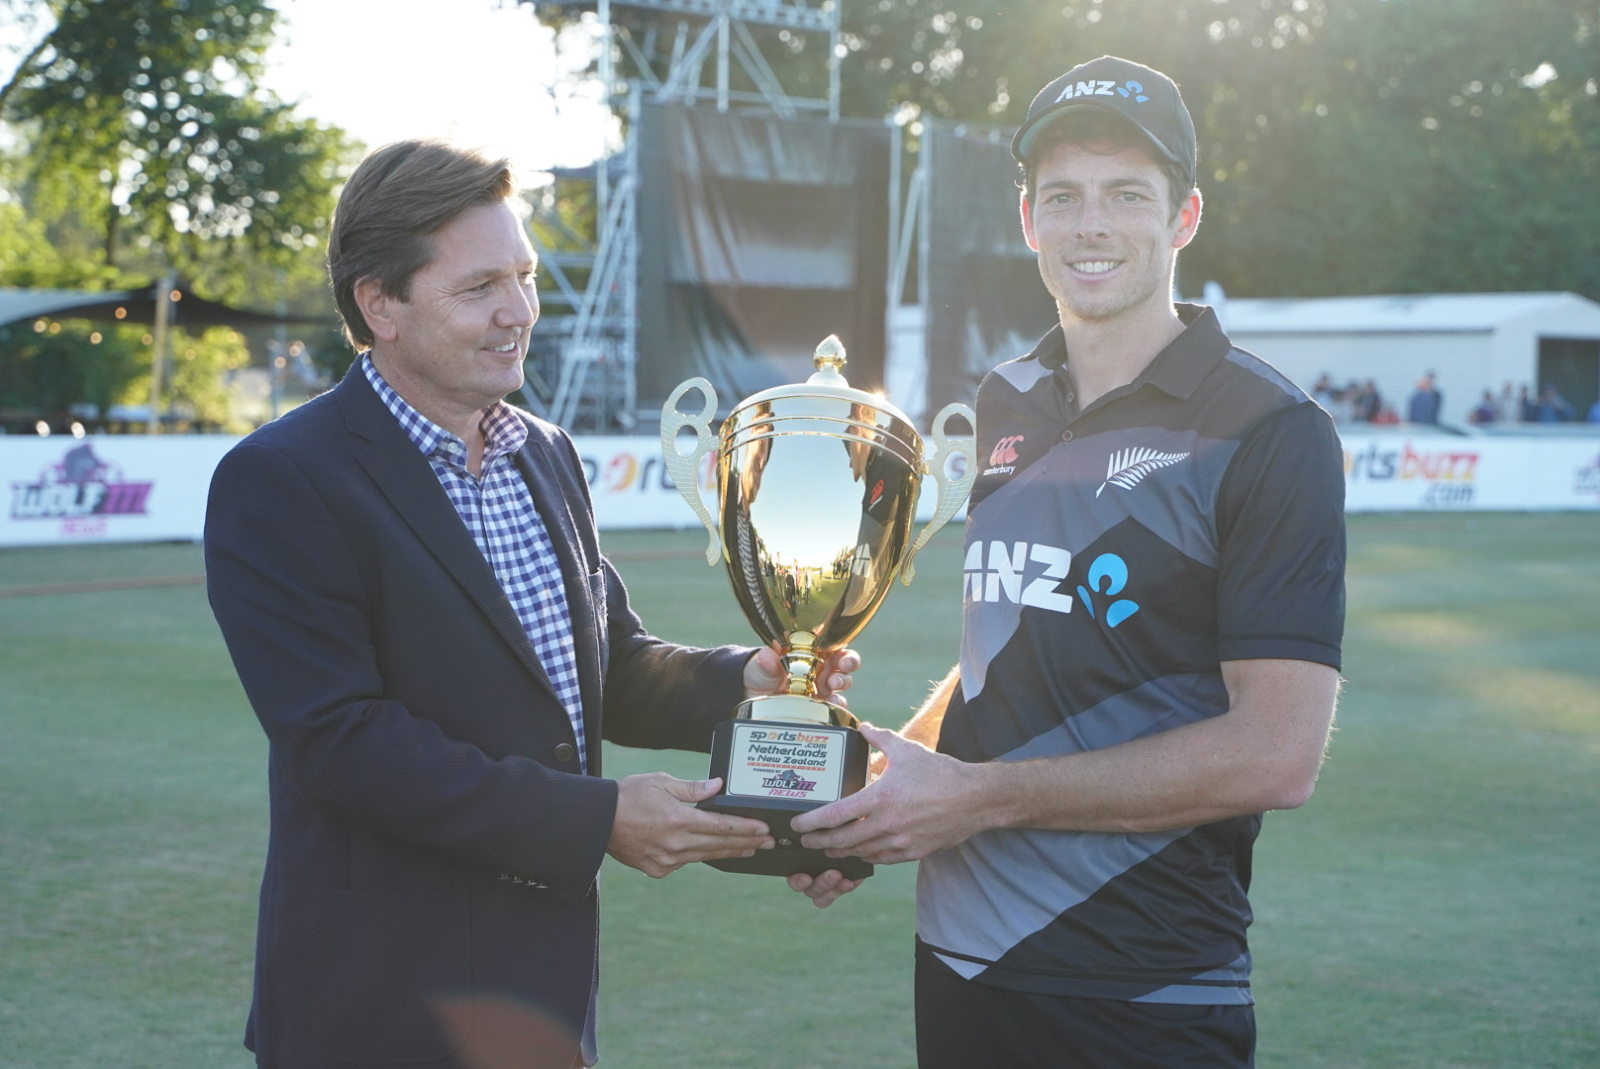 Skipper Santner leads the New Zealand team to the T20 victory against Dutch